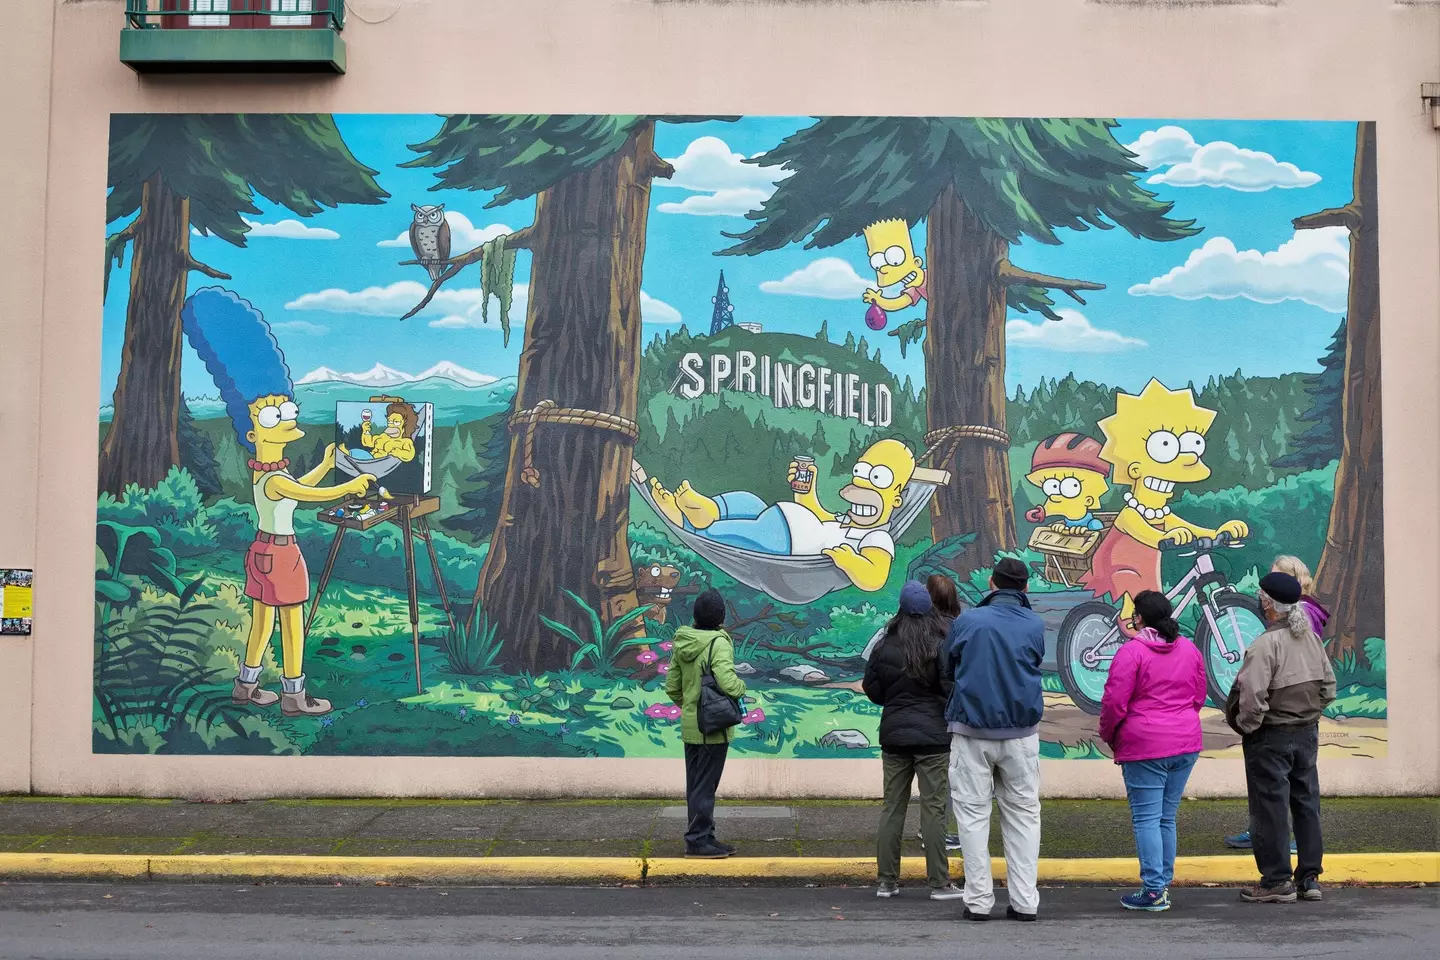 Springfield, Oregon enjoys a connection to The Simpsons.